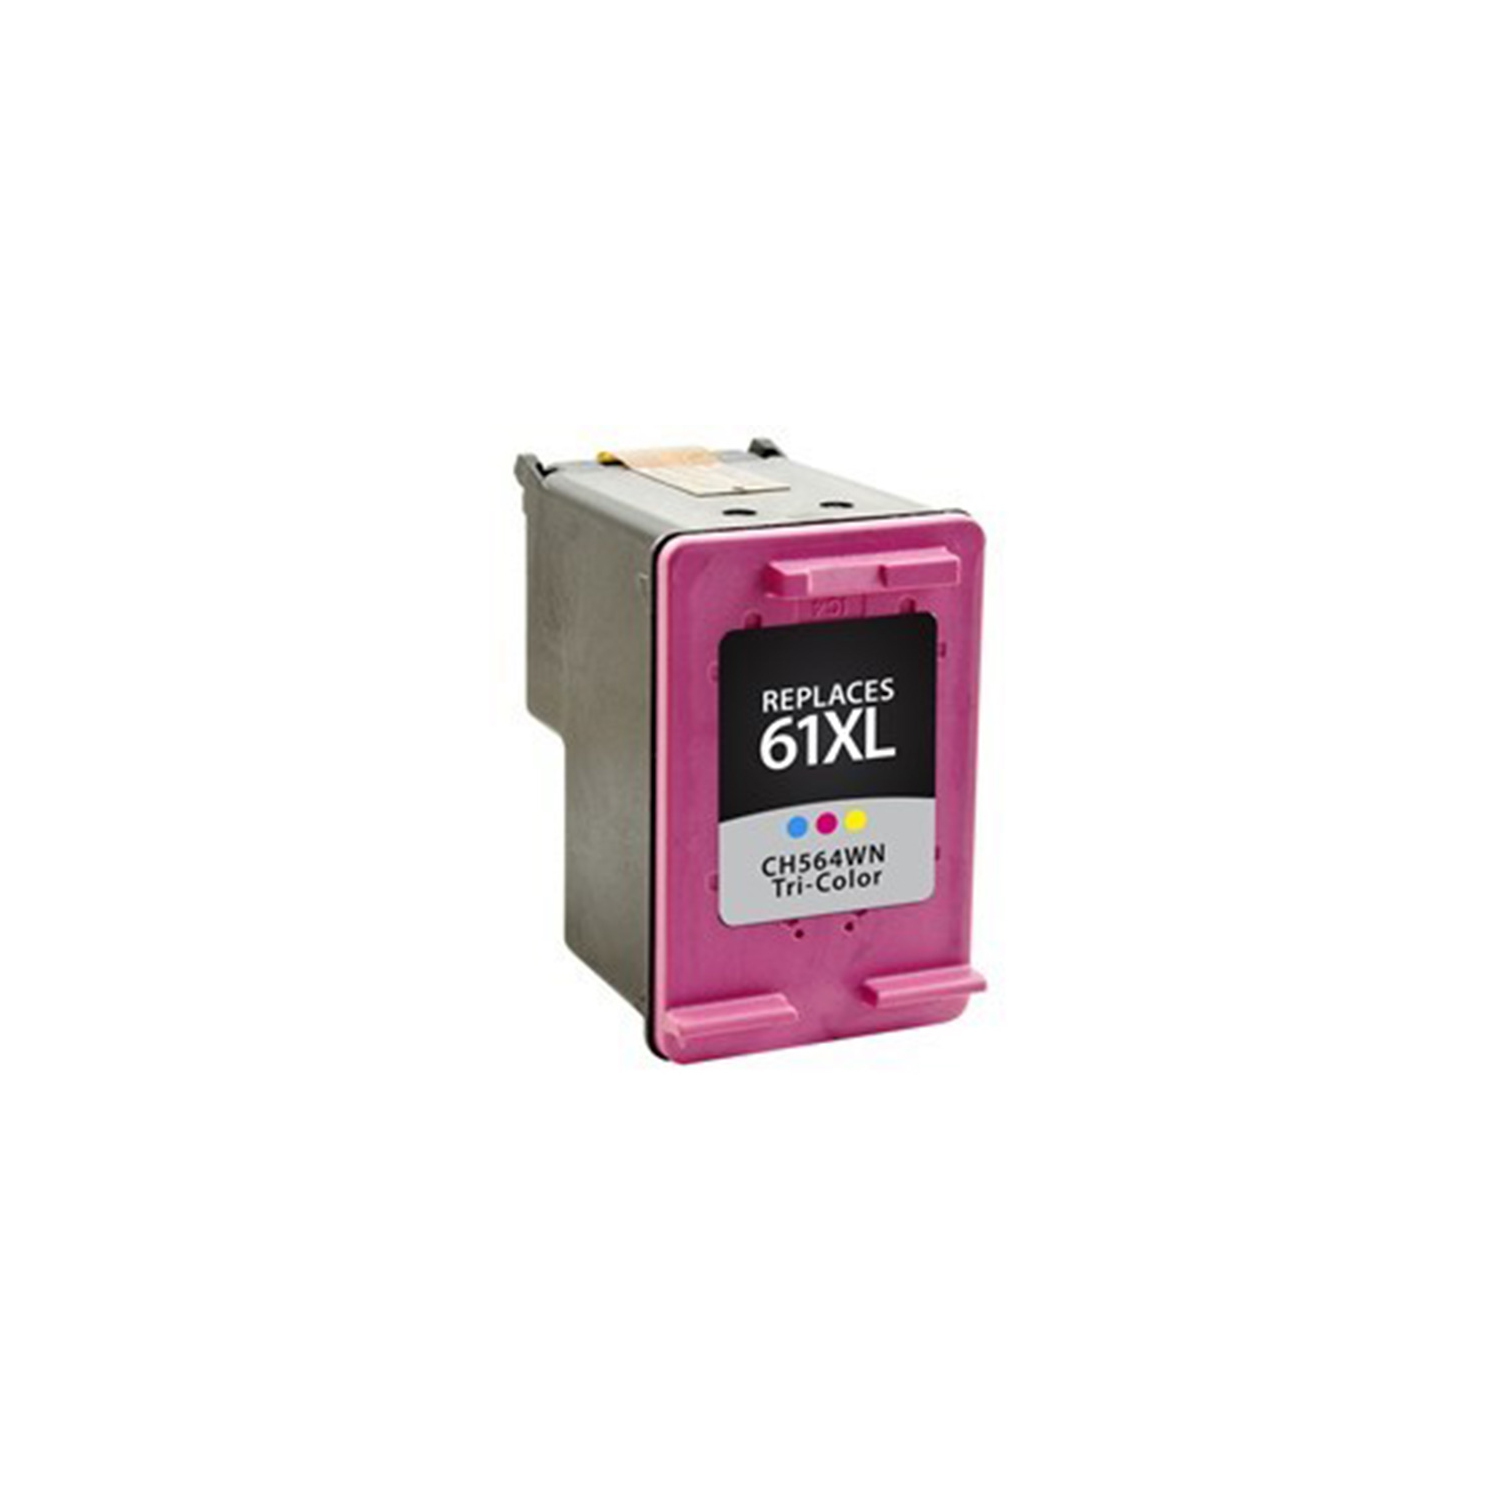 Ink House Remanufactured HP 61XL CH564WN Tri-Color Ink Cartridge